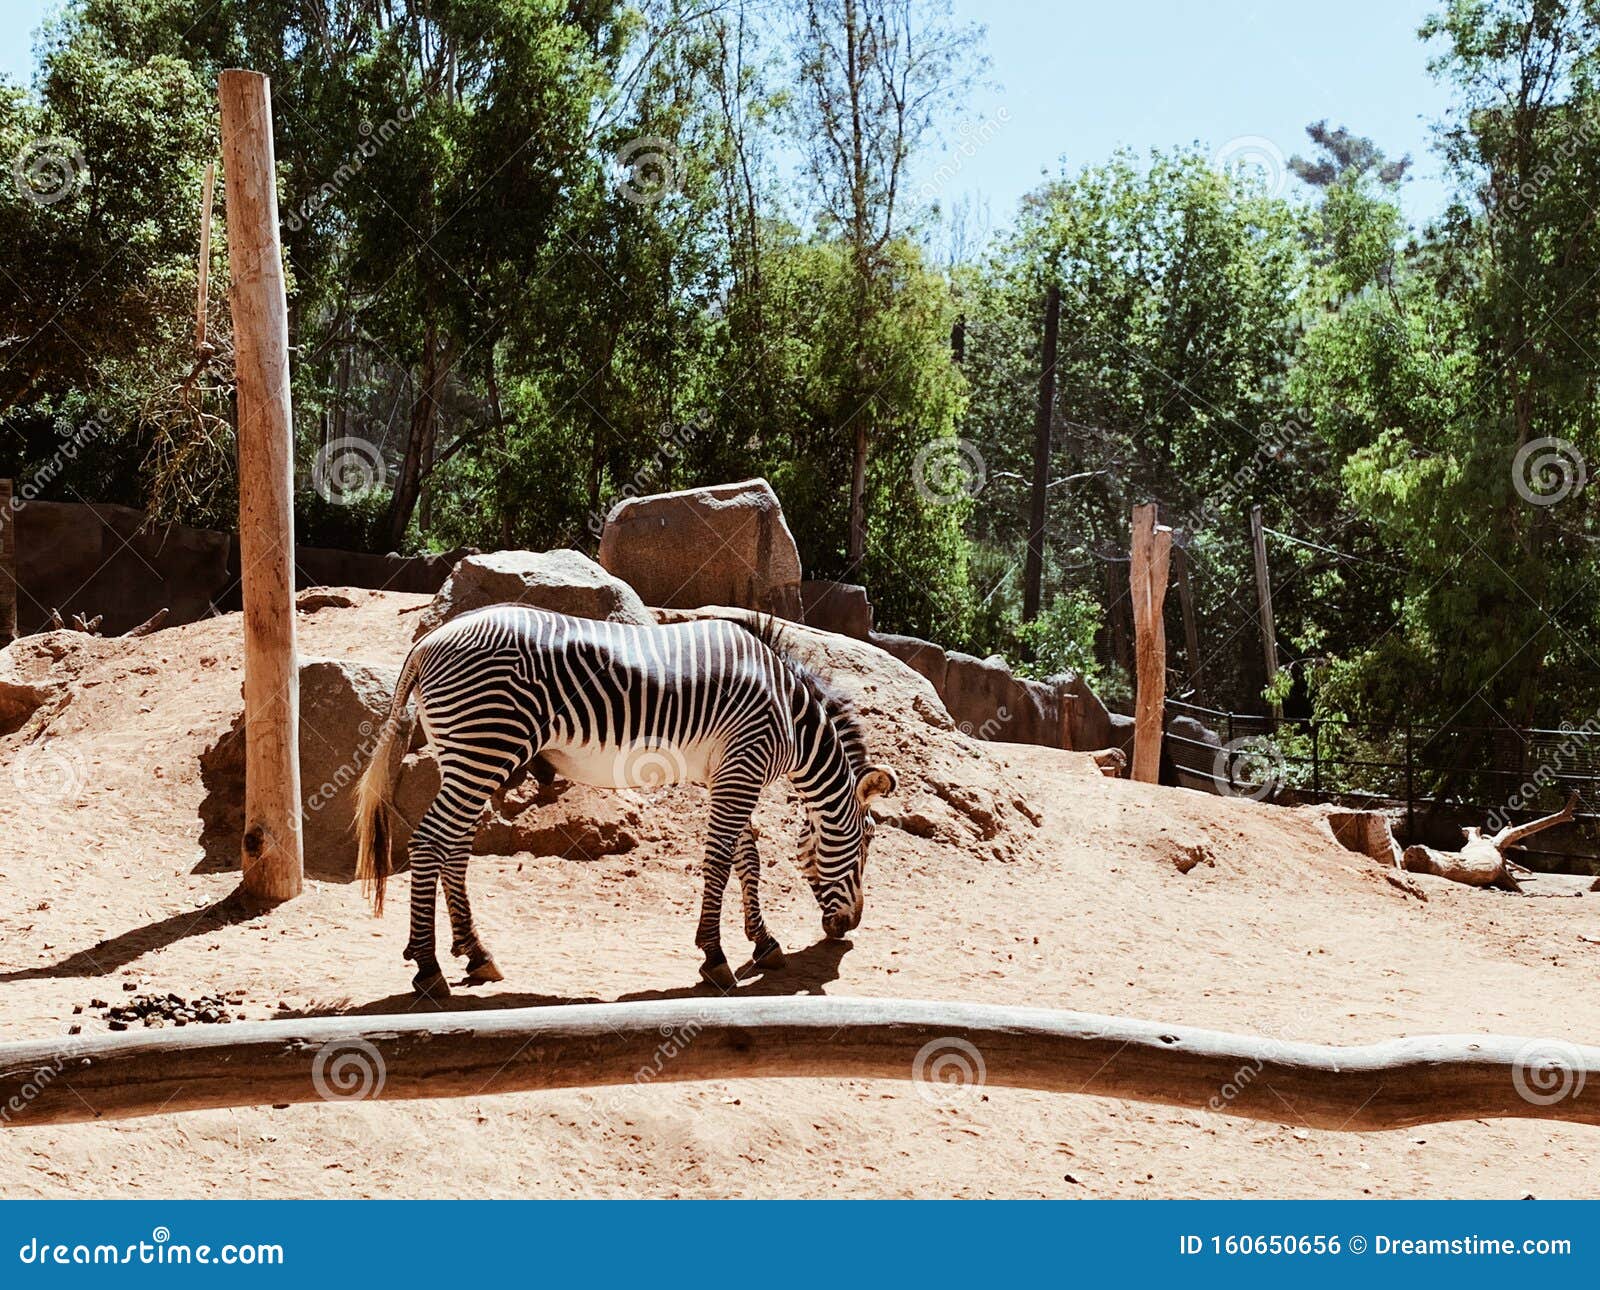 Zebras at the San Diego Zoo Editorial Photo - Image of mammal, exhibit:  160650656